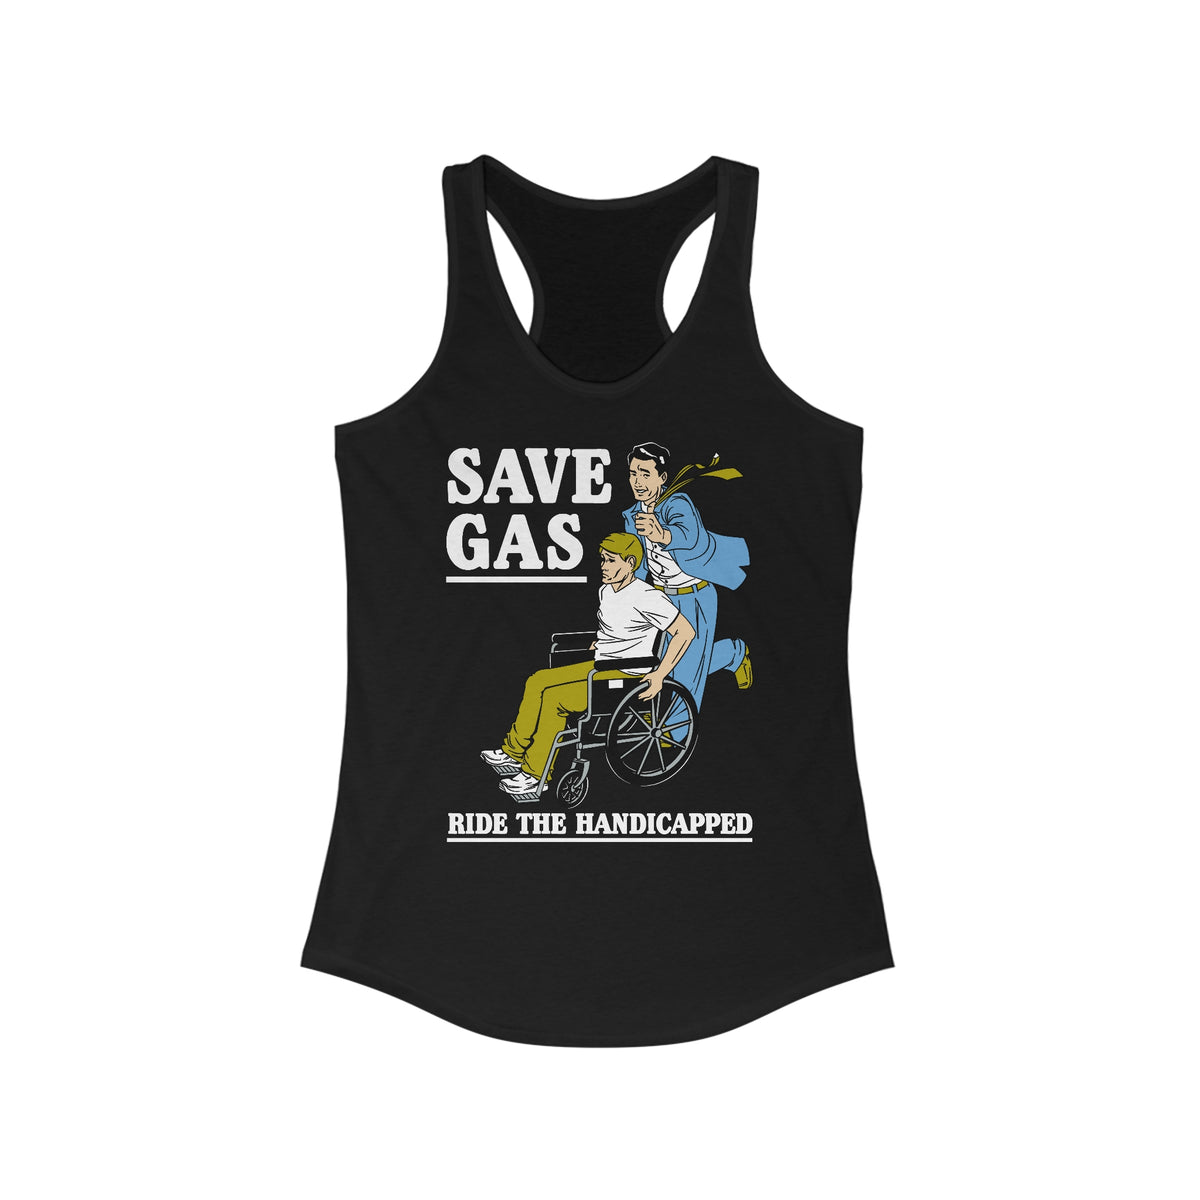 Save Gas - Ride The Handicapped - Women’s Racerback Tank